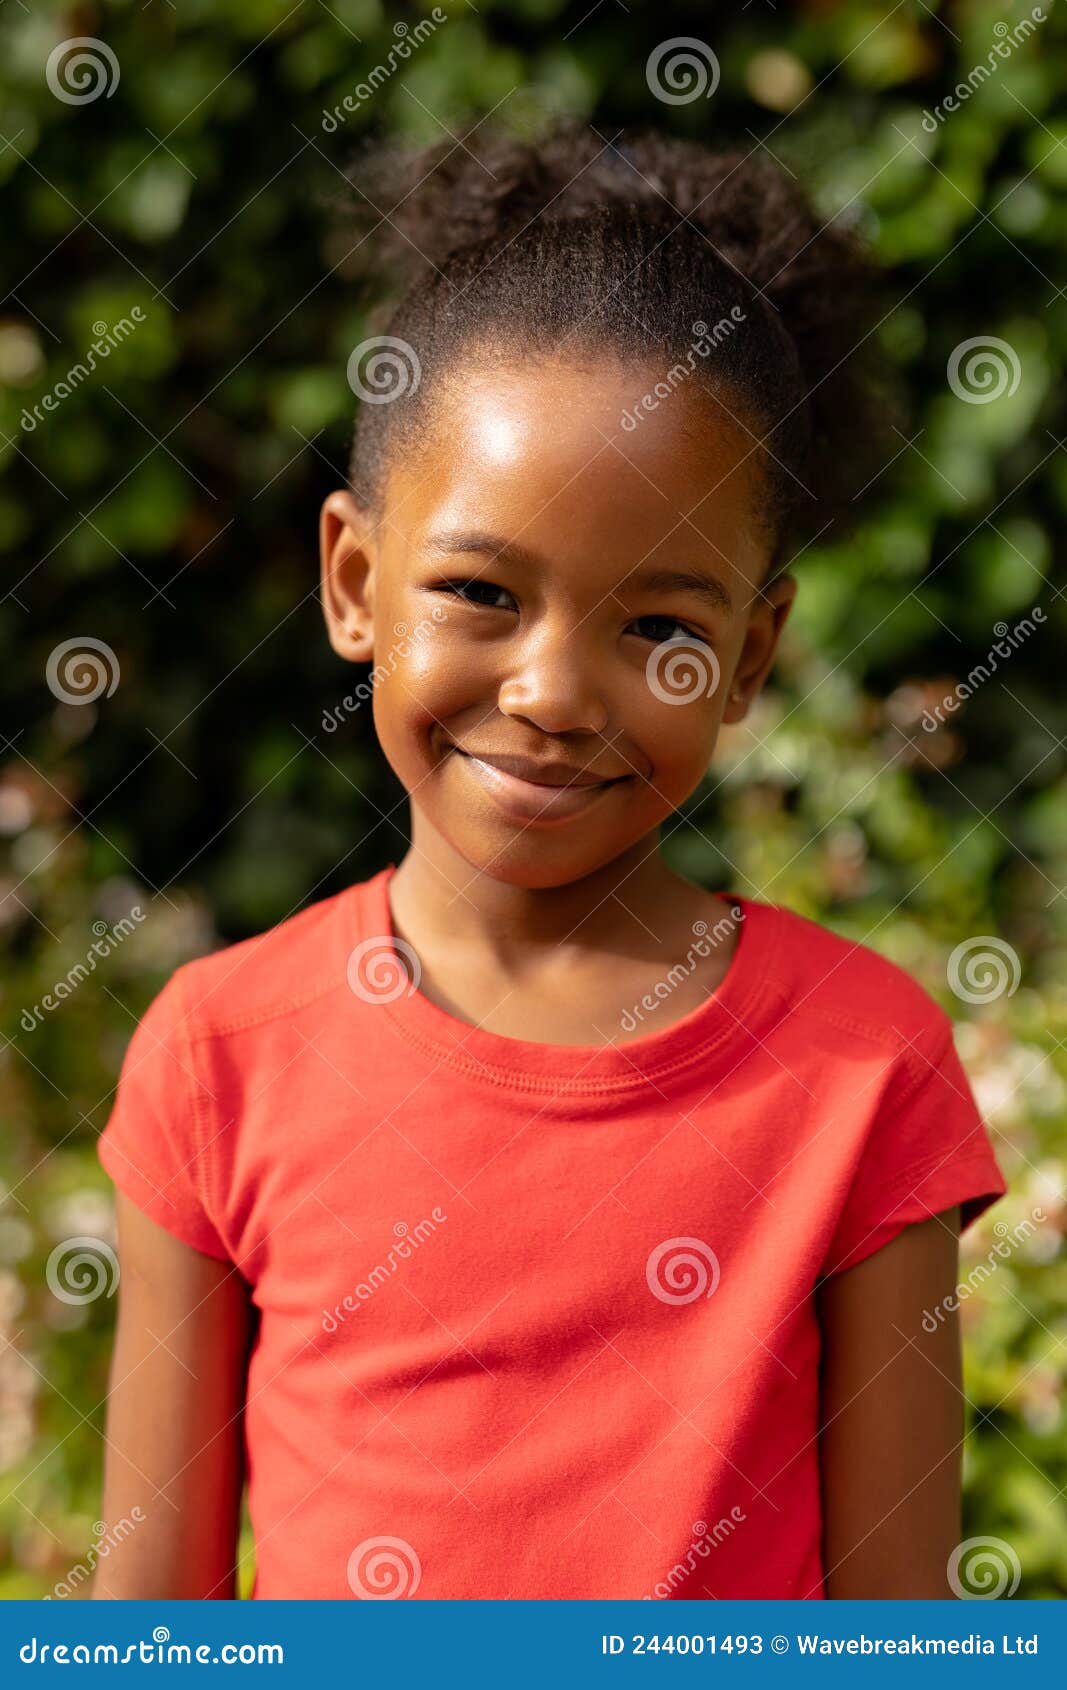 Portrait Of Cute Smiling African American Girl Standing Against Plants